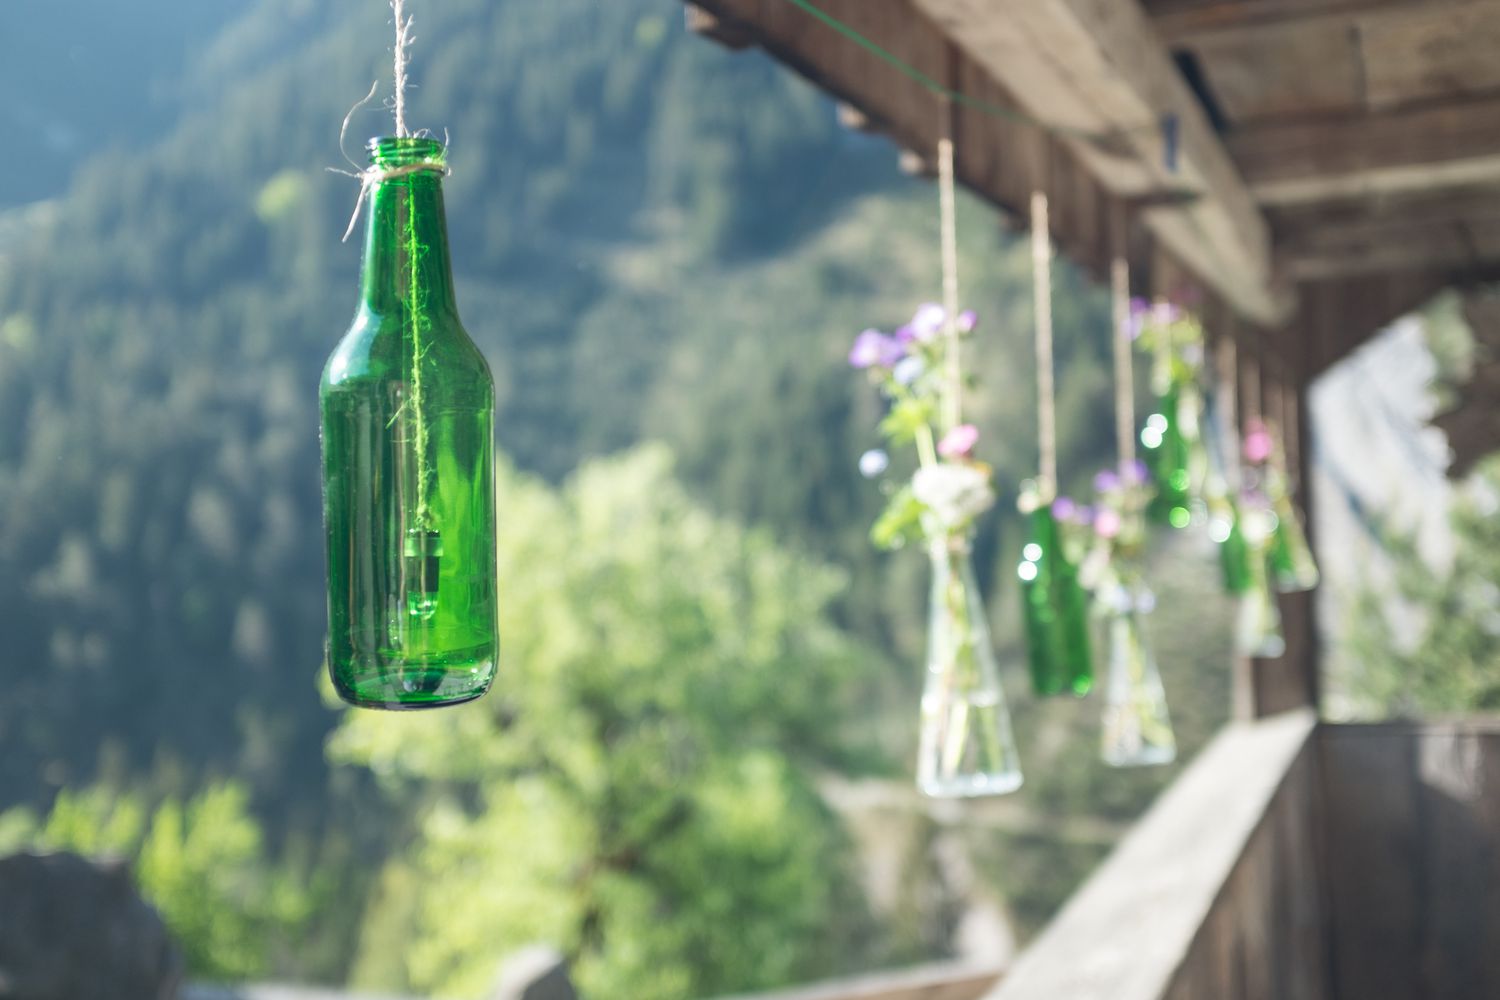 Bottles hanging from porch ceiling